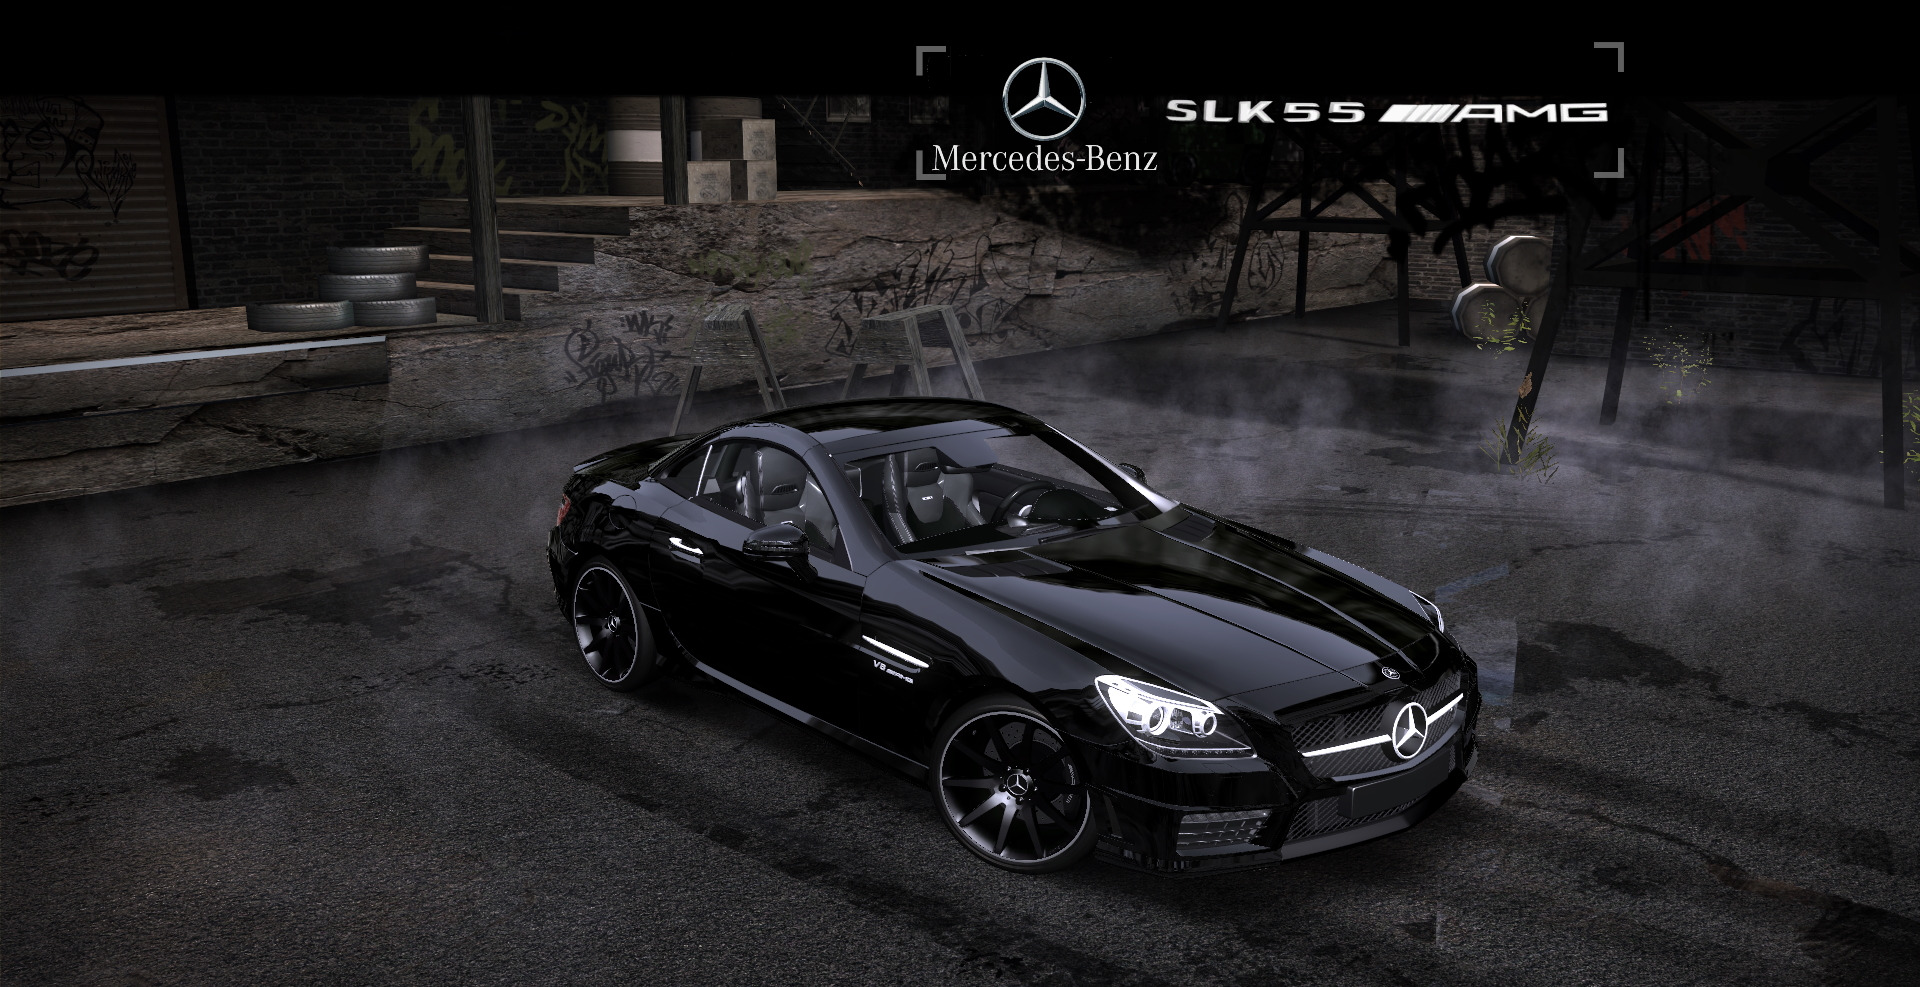 Need For Speed Most Wanted Mercedes Benz 2012 Mercedes-Benz SLK55 AMG